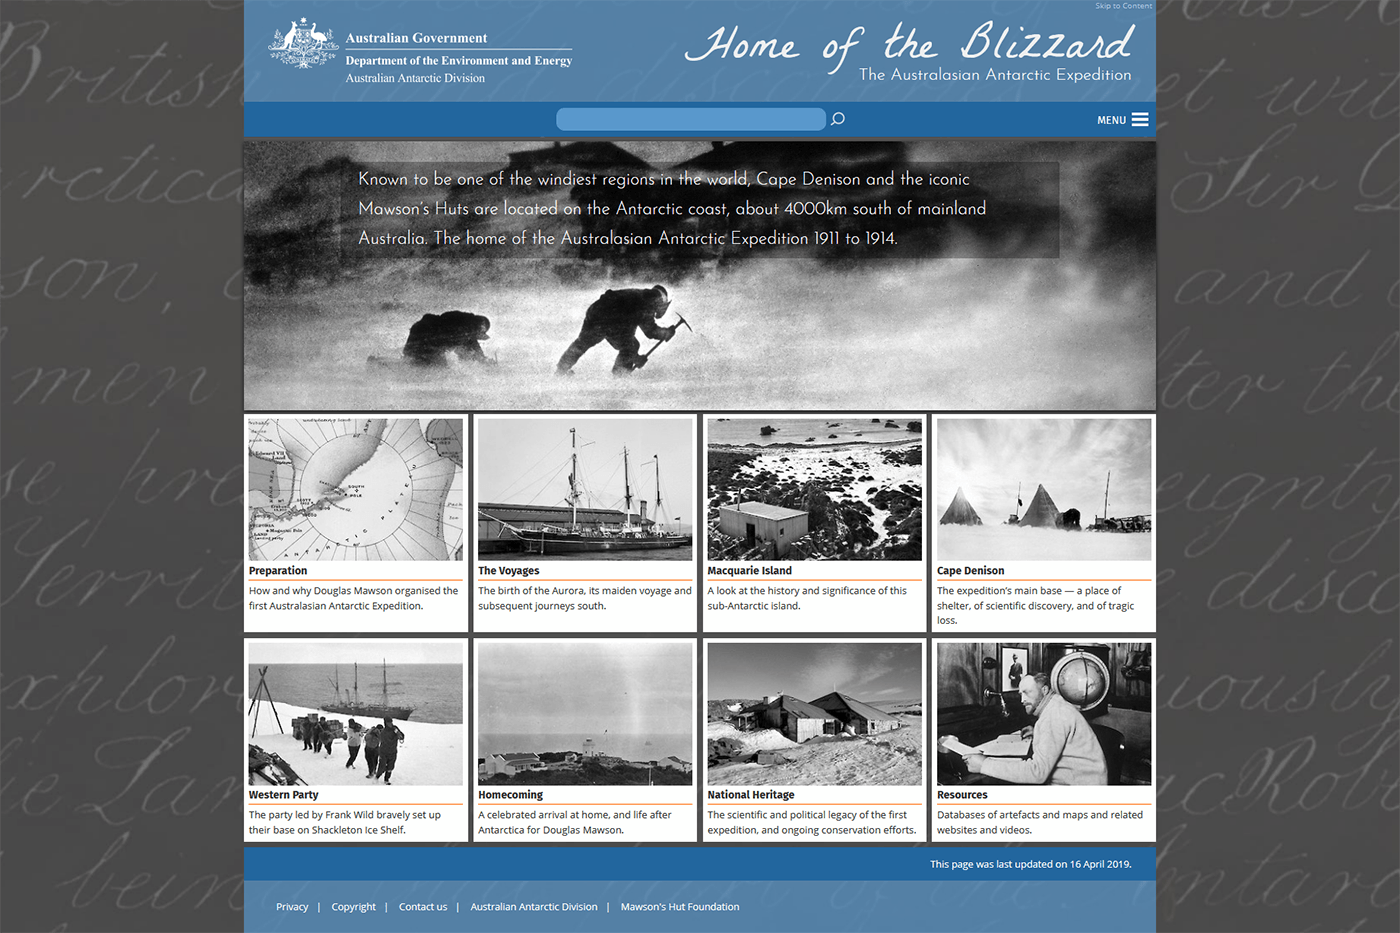 Home of the Blizzard - The Australasian Antarctic Expedition